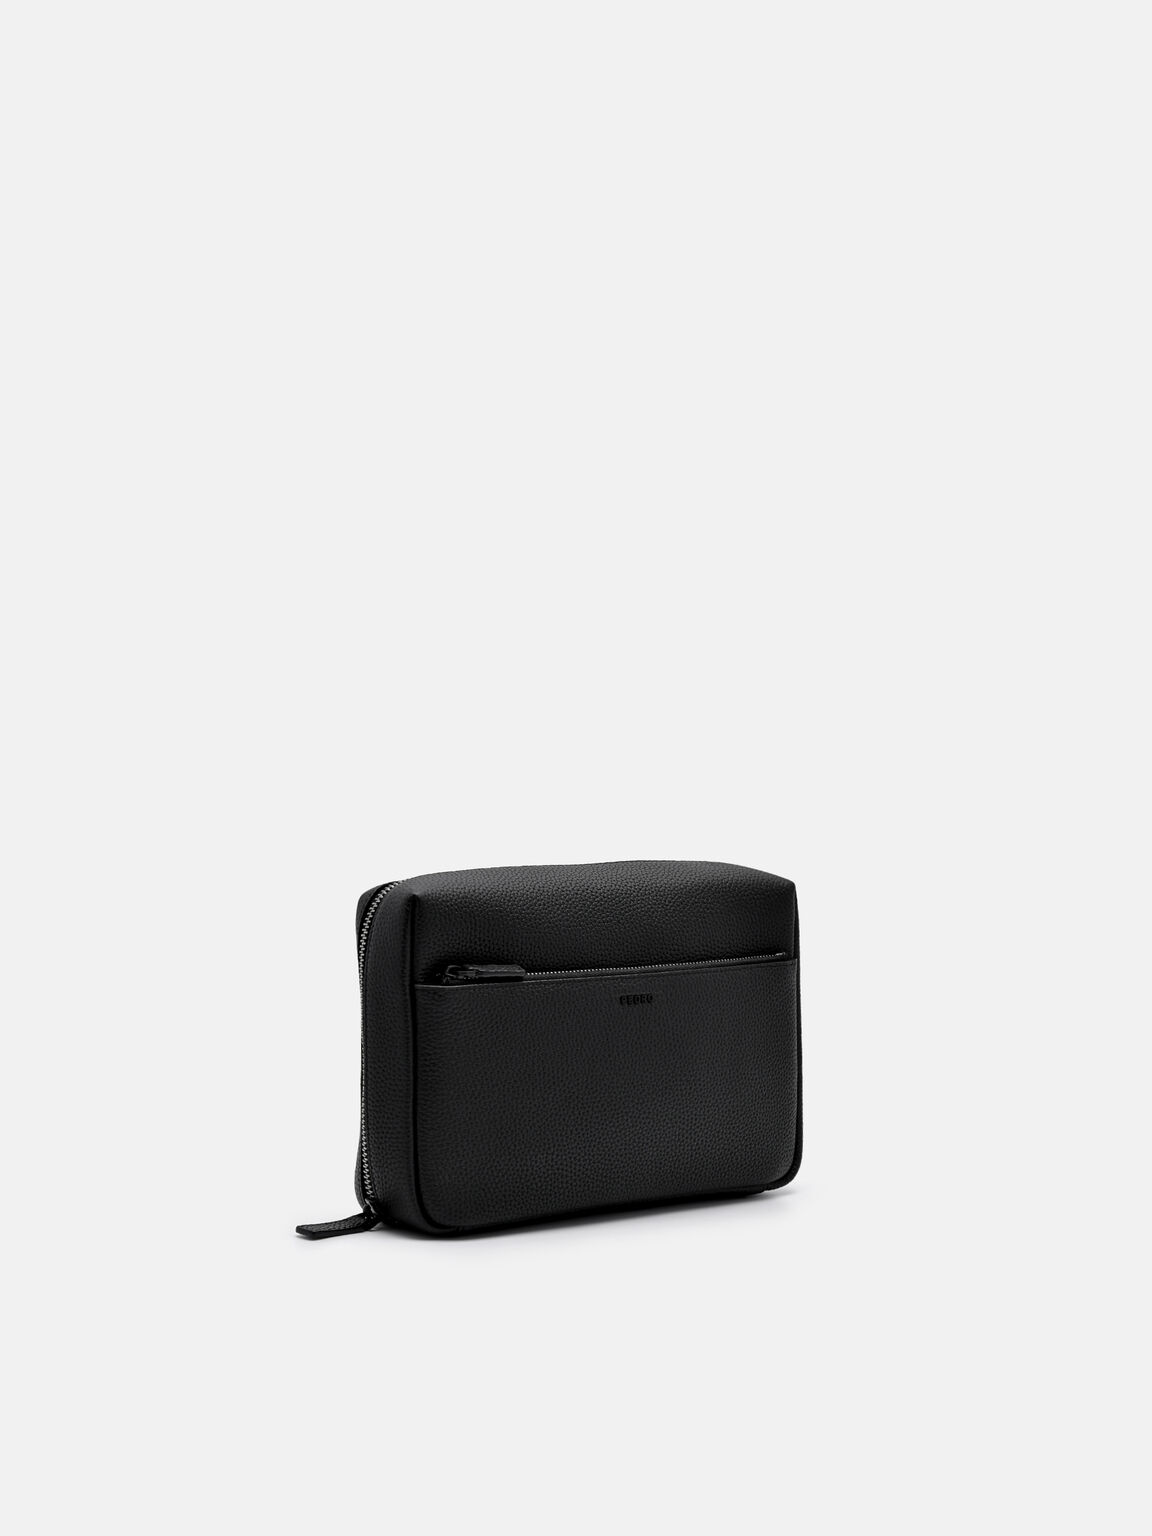 Embossed Leather Pouch, Black